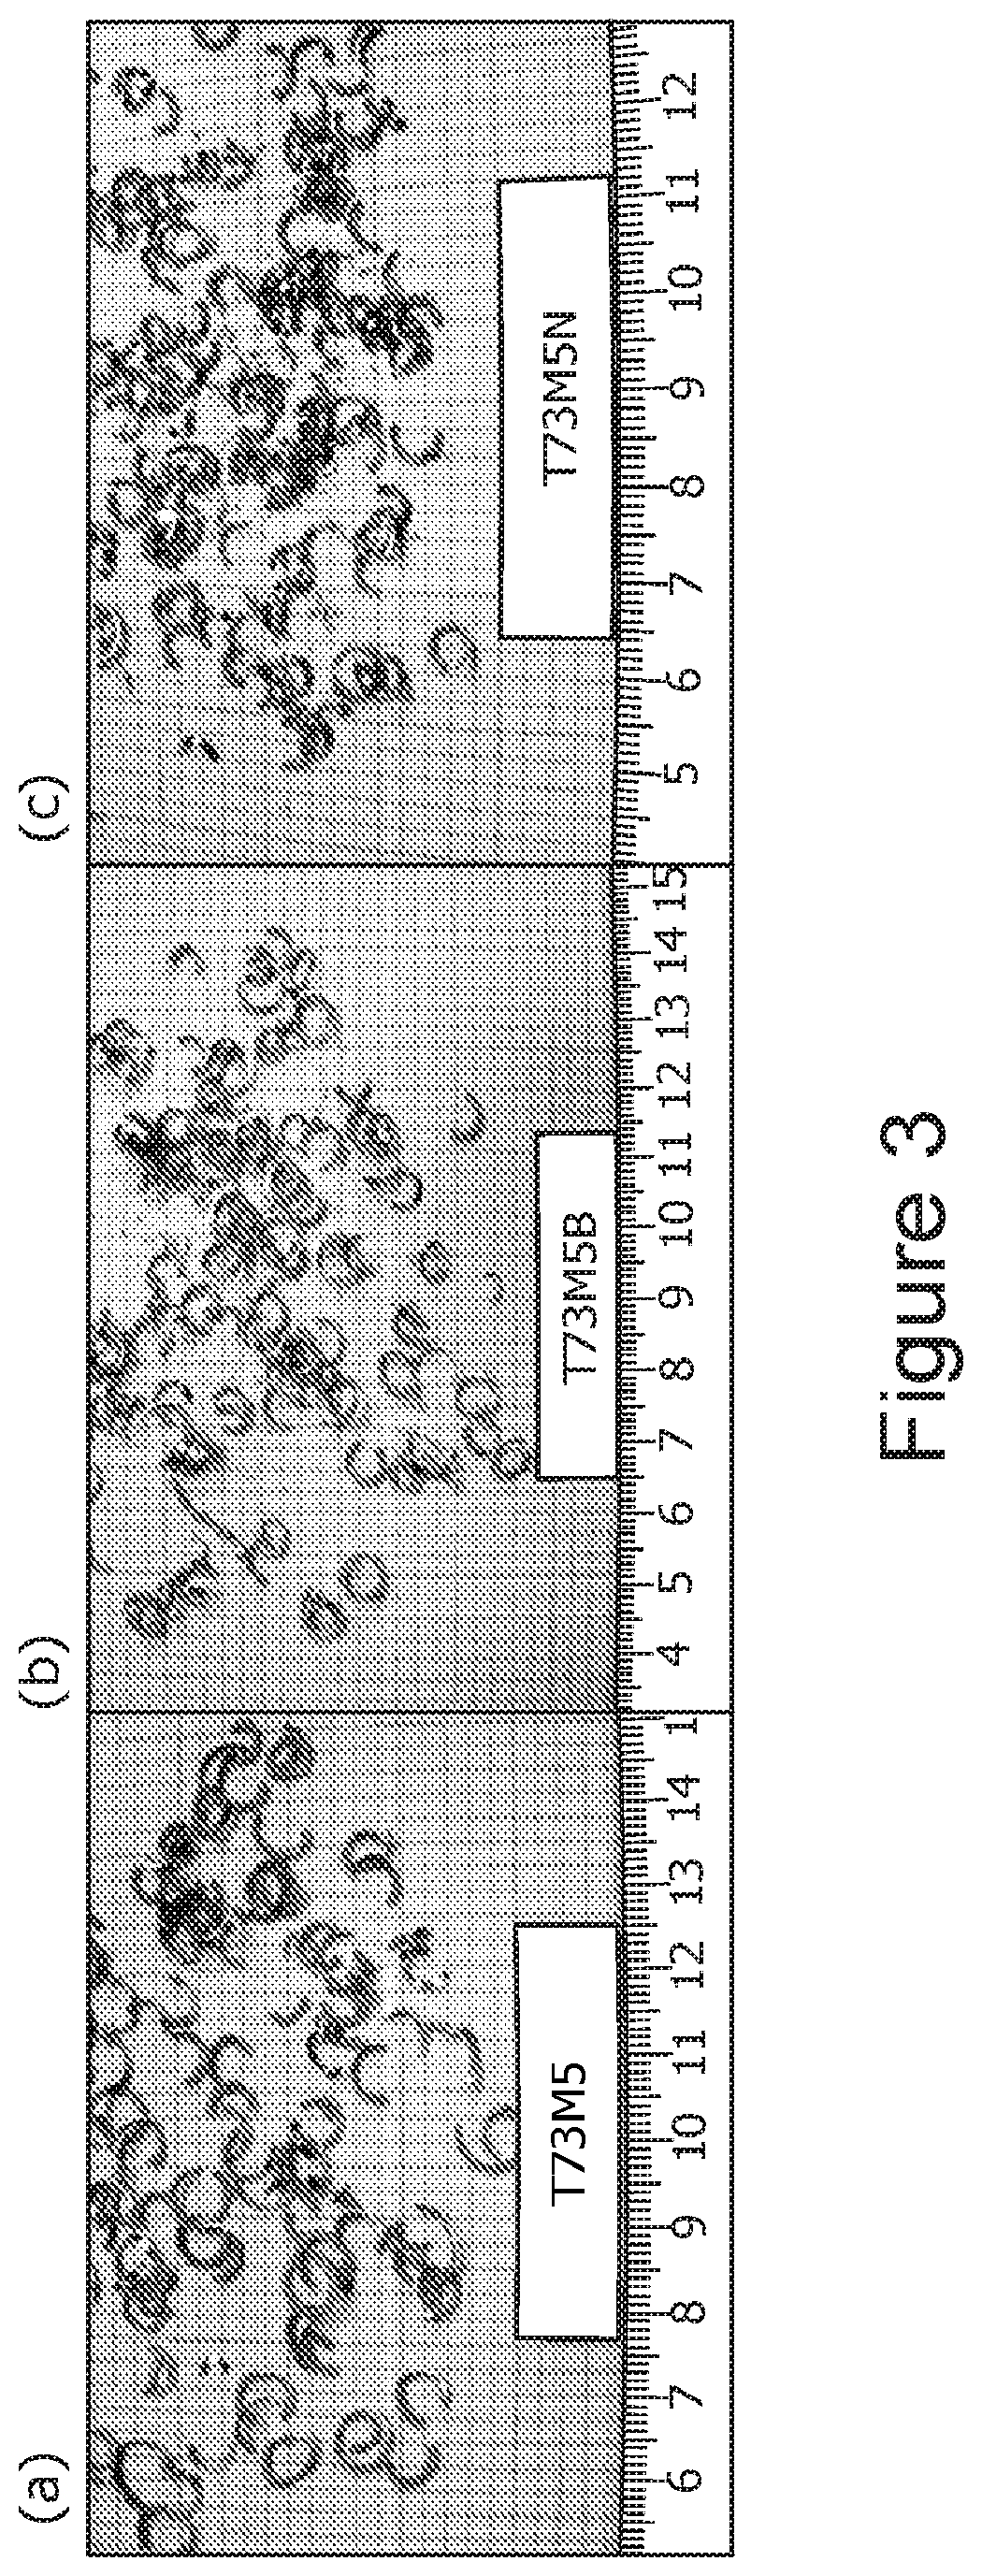 Unleaded free-cutting brass alloys with excellent castability, method for producing the same, and application thereof